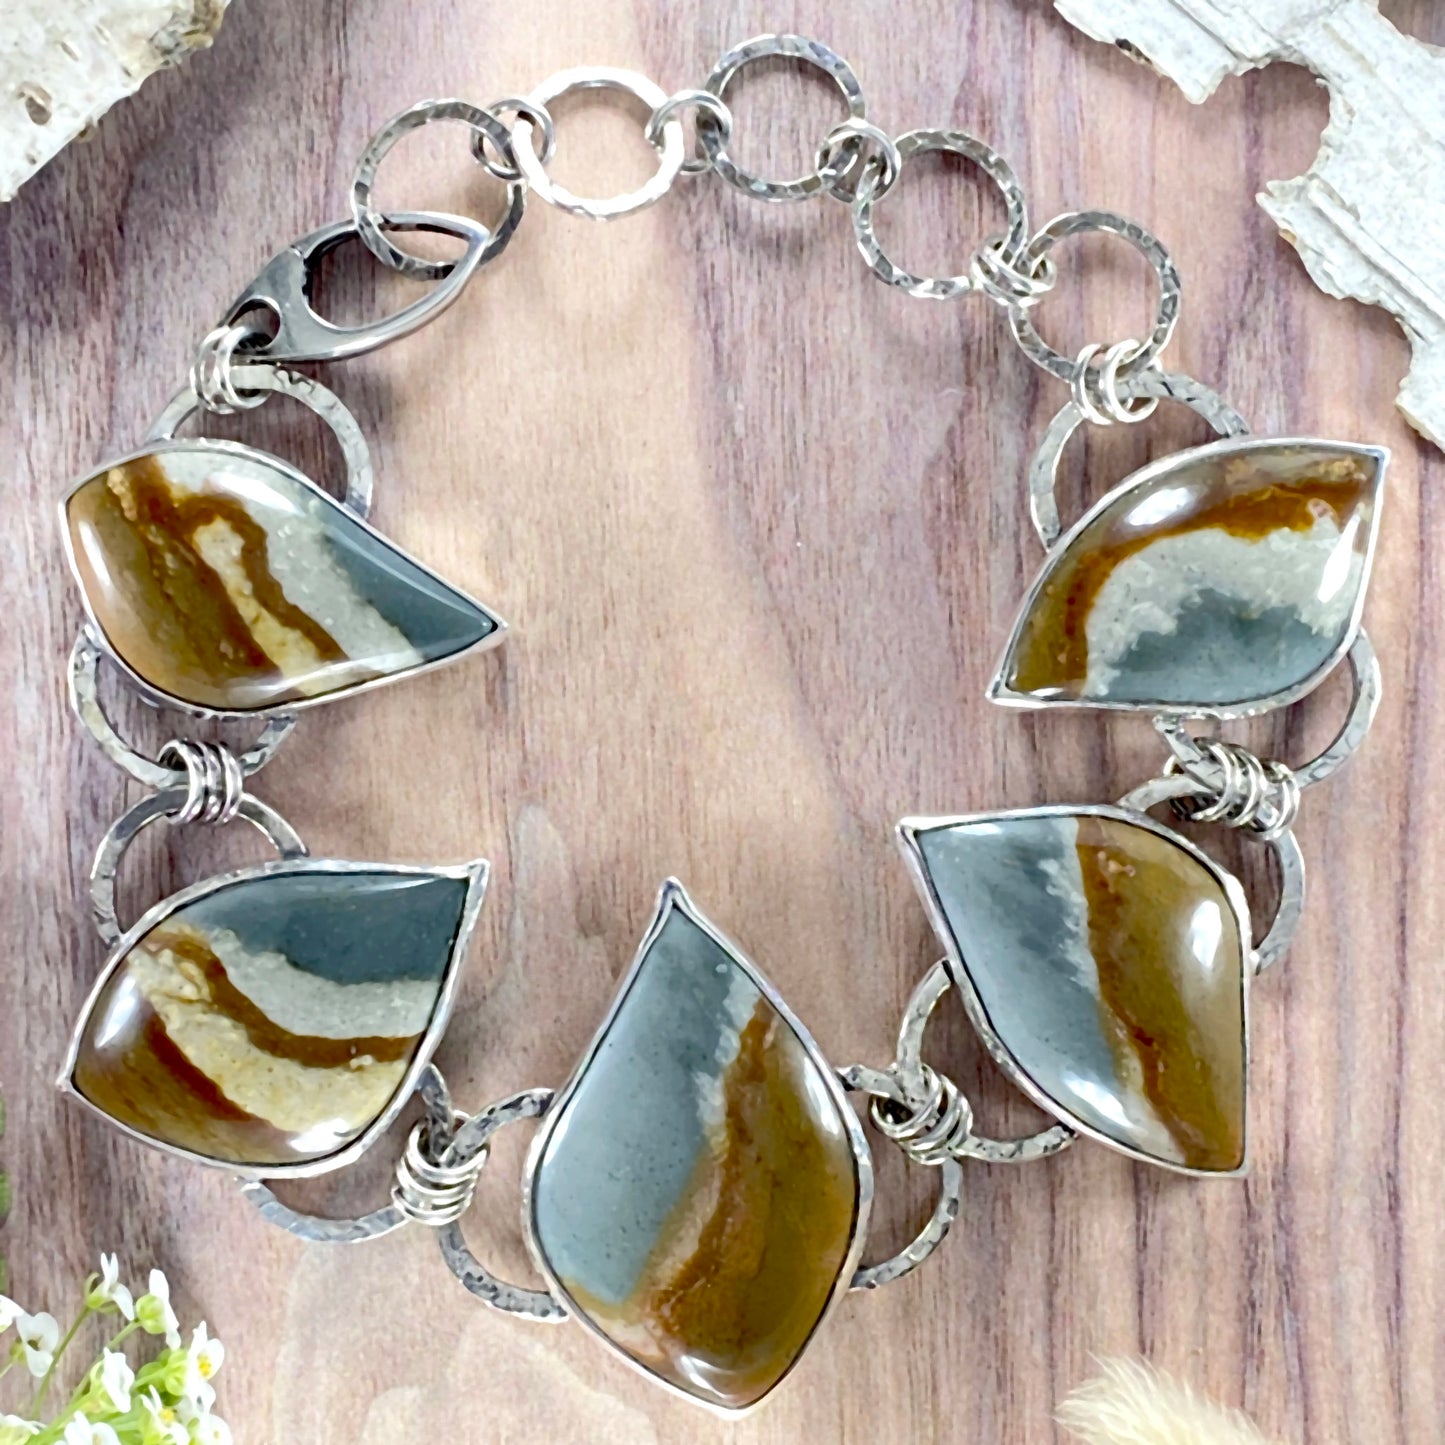 Polychrome Jasper Bracelet Front View - Stone Treasures by the Lake